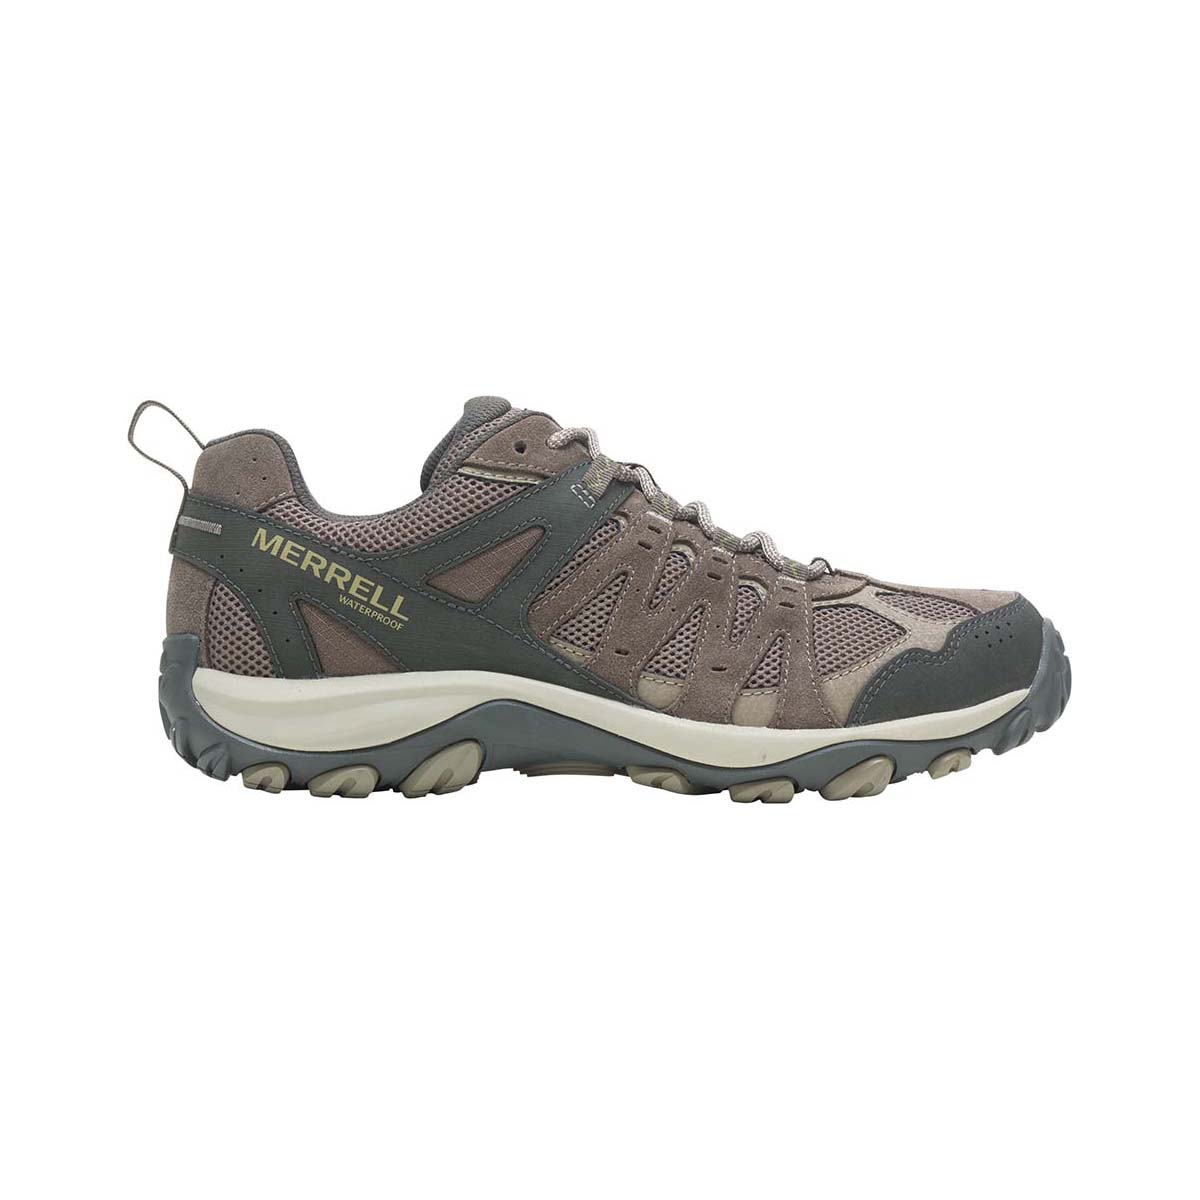 Merrell Accentor 3 Men's Low WP Hiking Boots Boulder 10